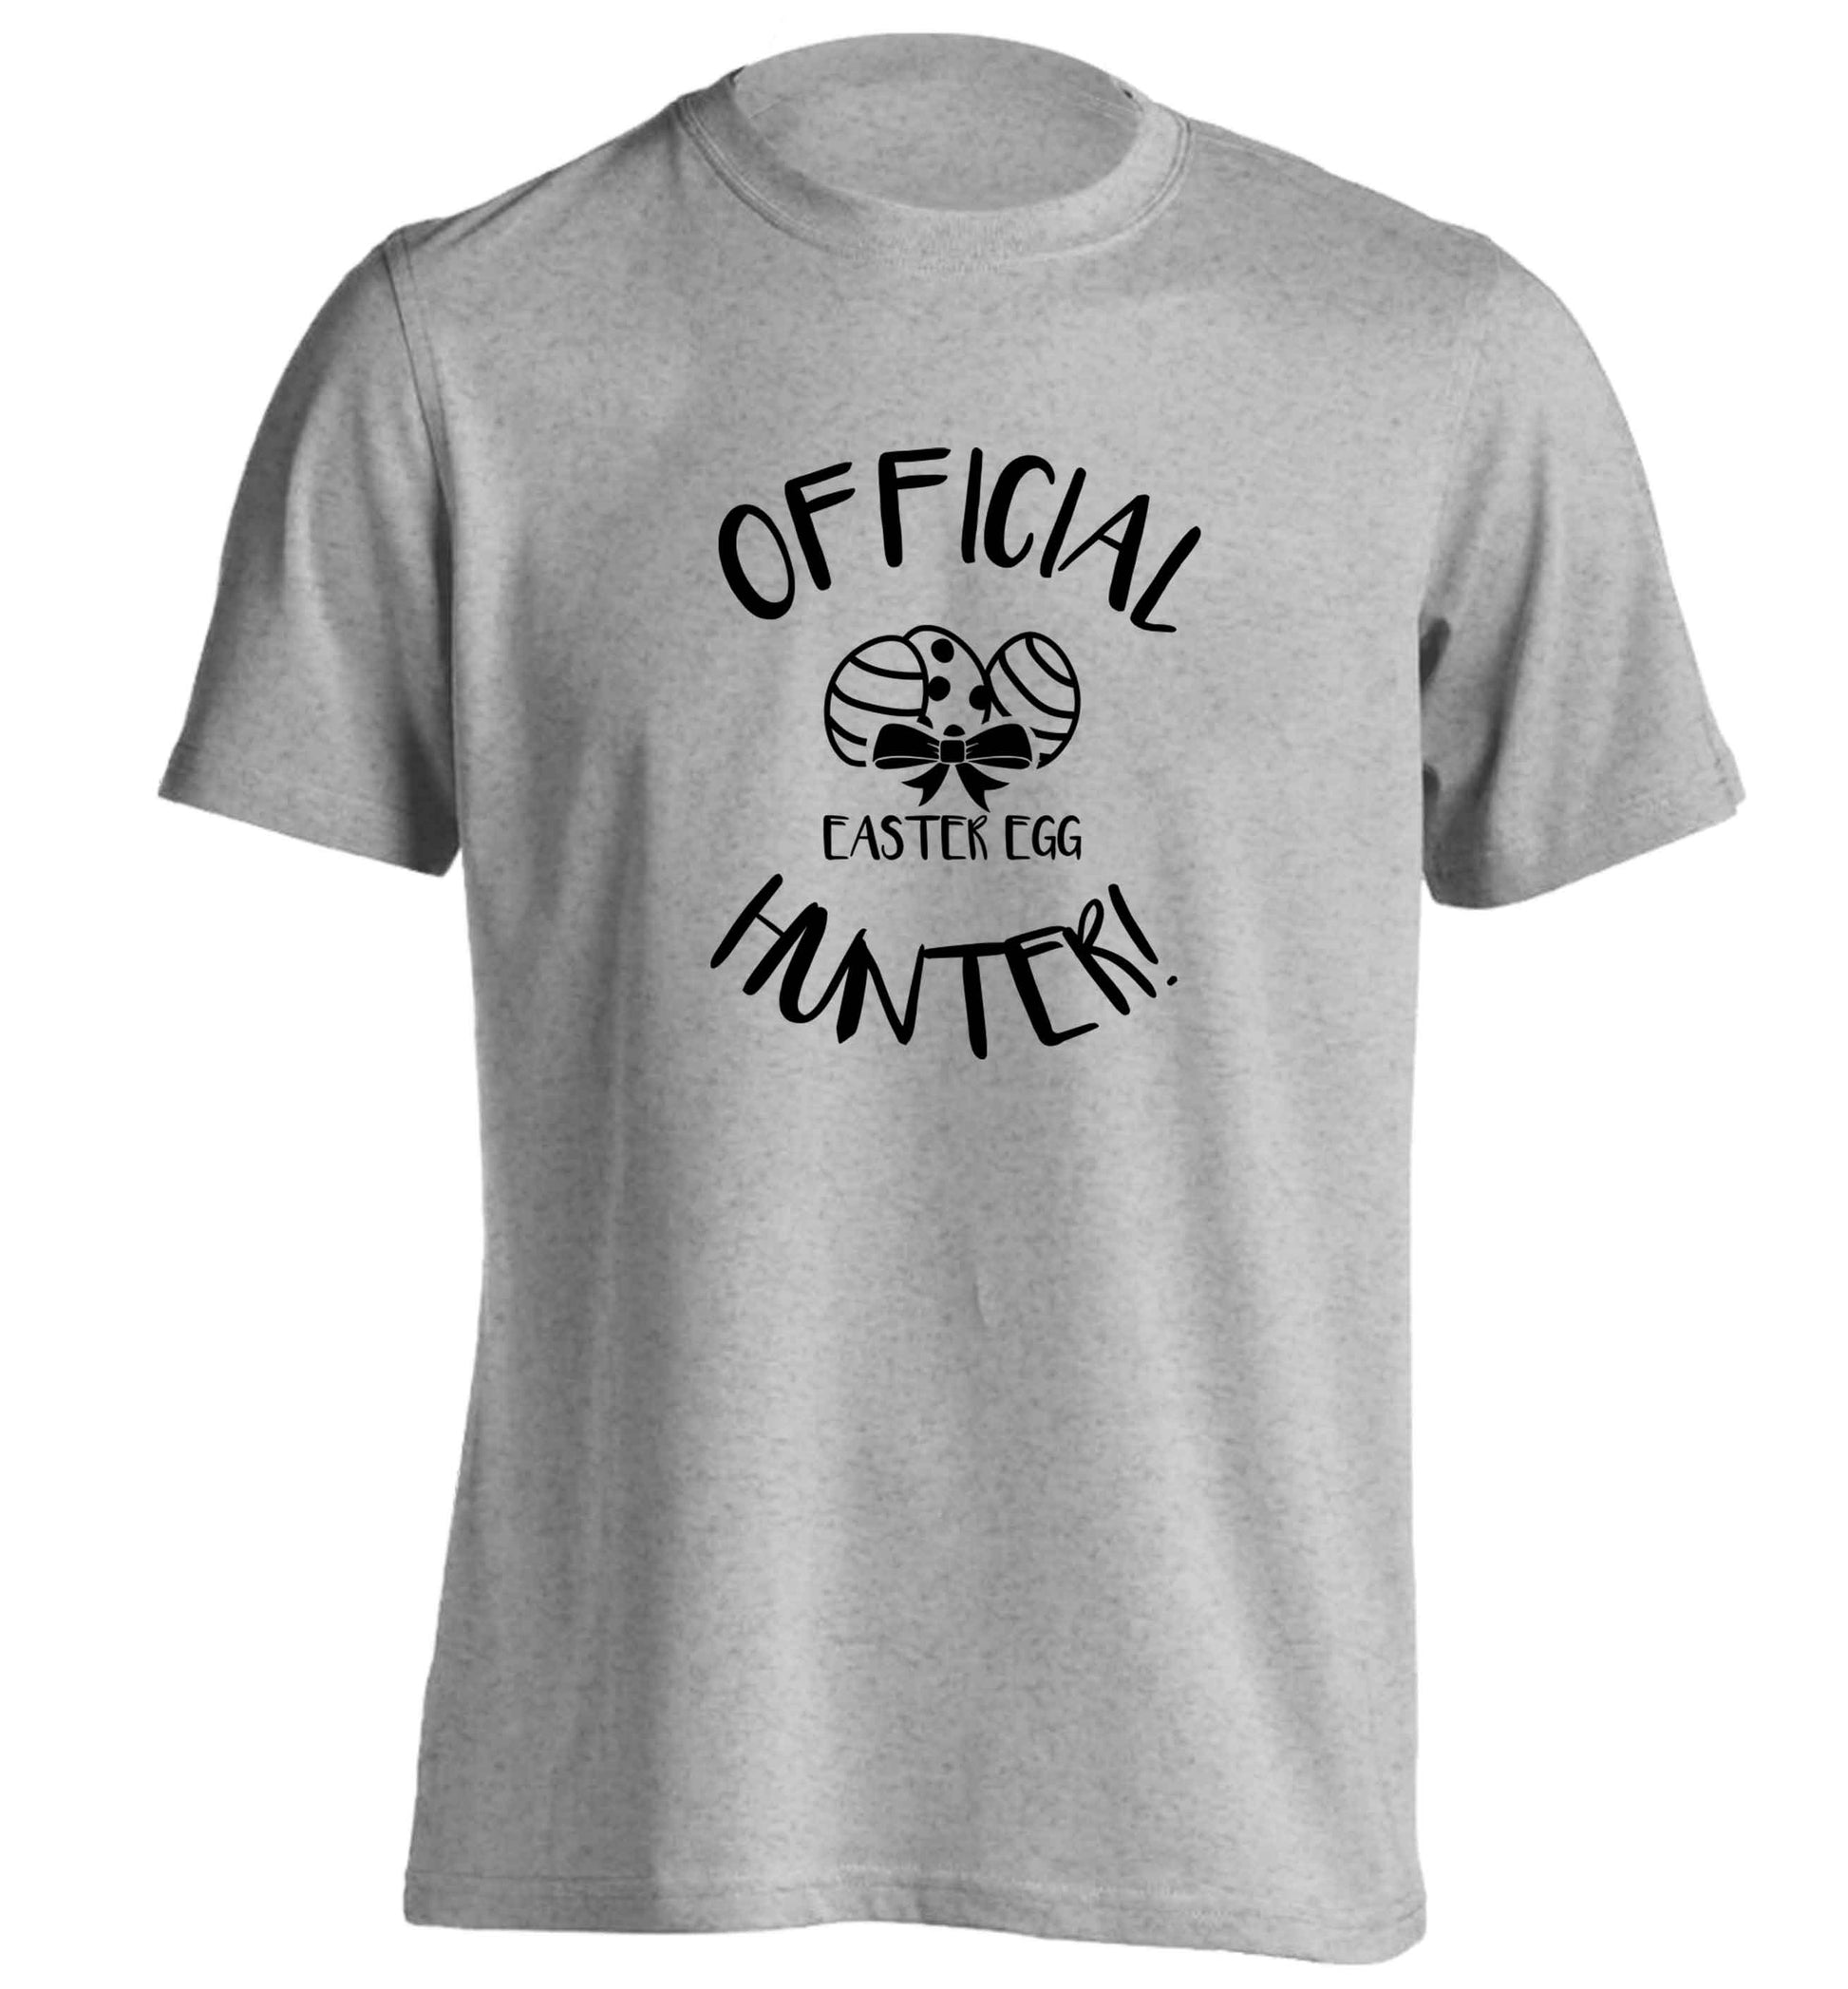 Official Easter egg hunter! adults unisex grey Tshirt 2XL